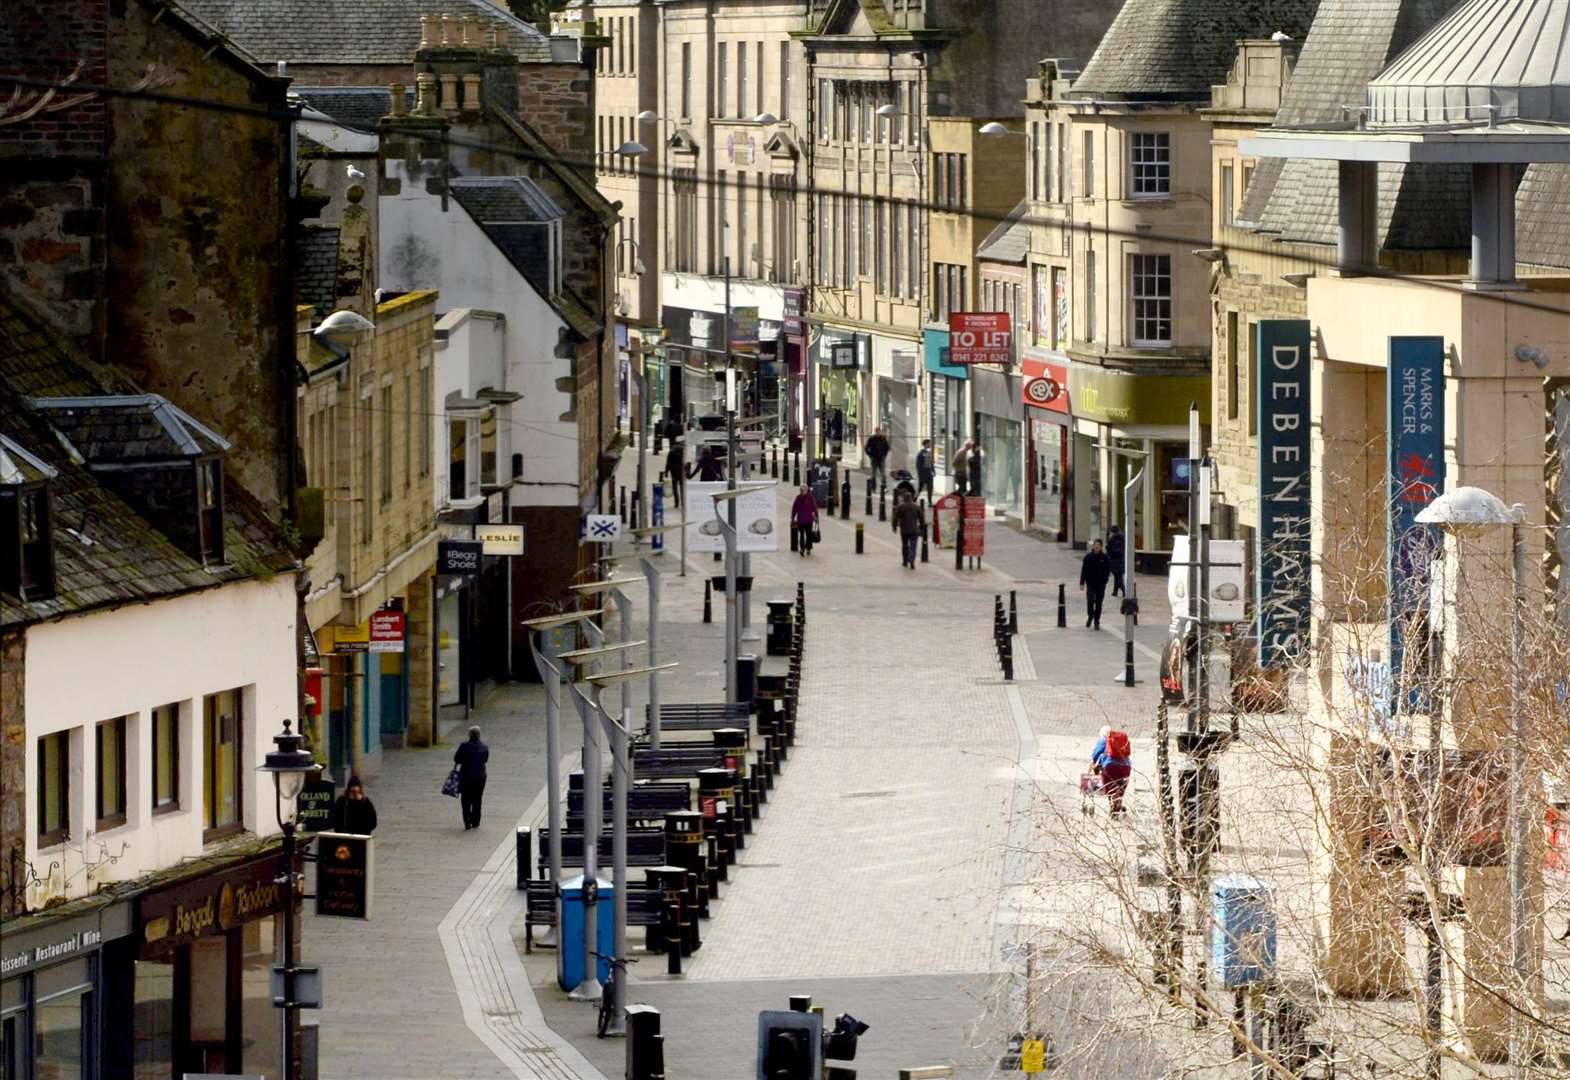 City leaders are keen to spread the message that it is safe to return to the high street.